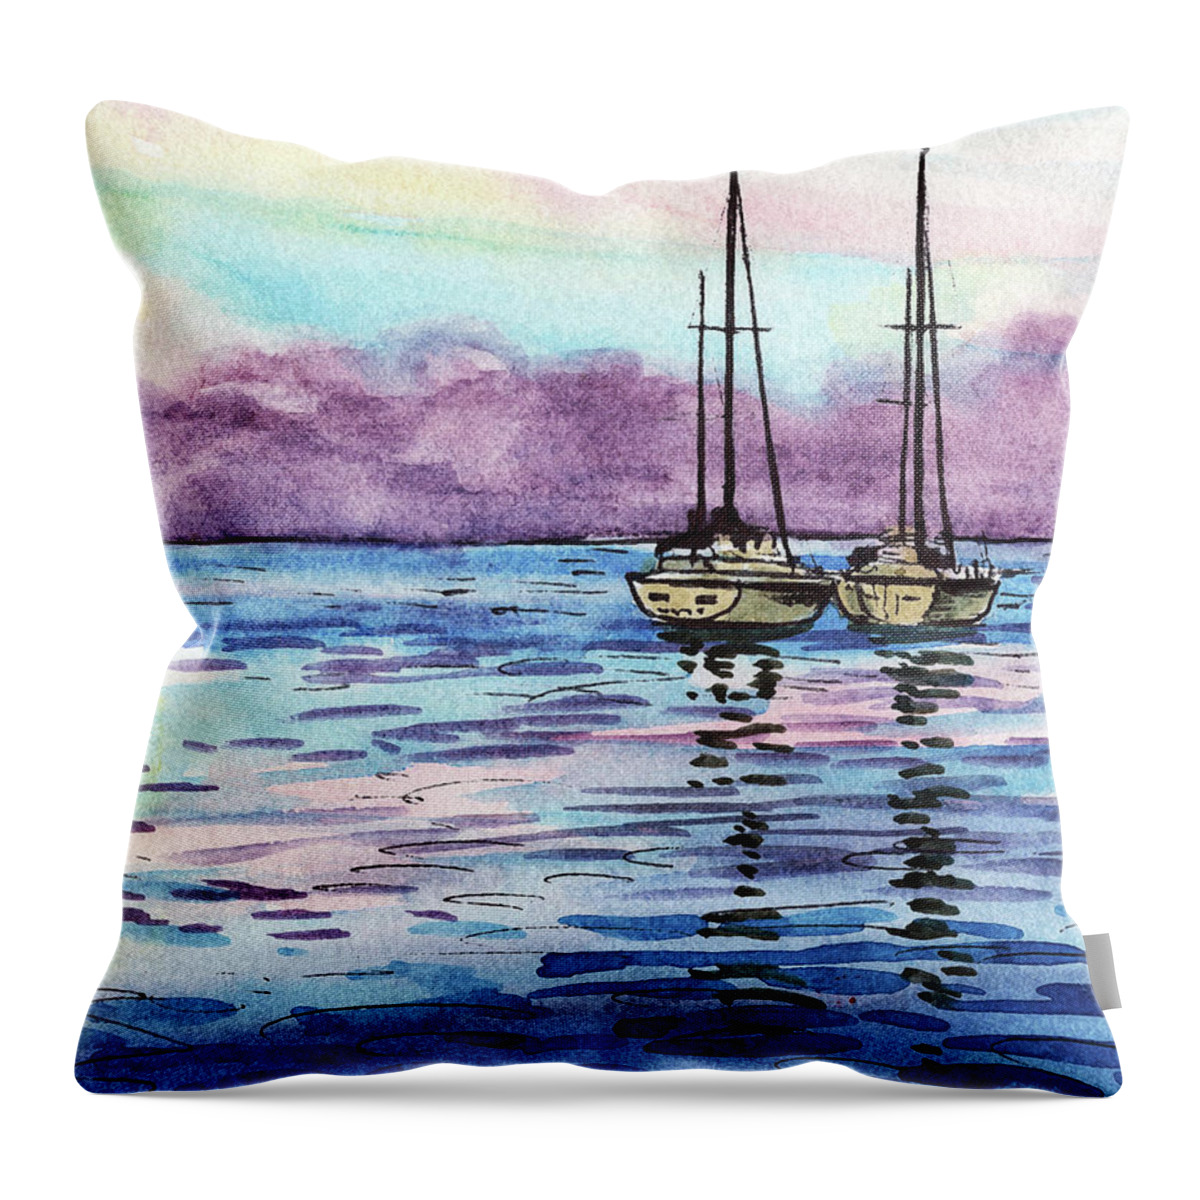 Boats Throw Pillow featuring the painting Two Sailboats Resting In The Ocean Purple Clouds Watercolor Beach Art by Irina Sztukowski